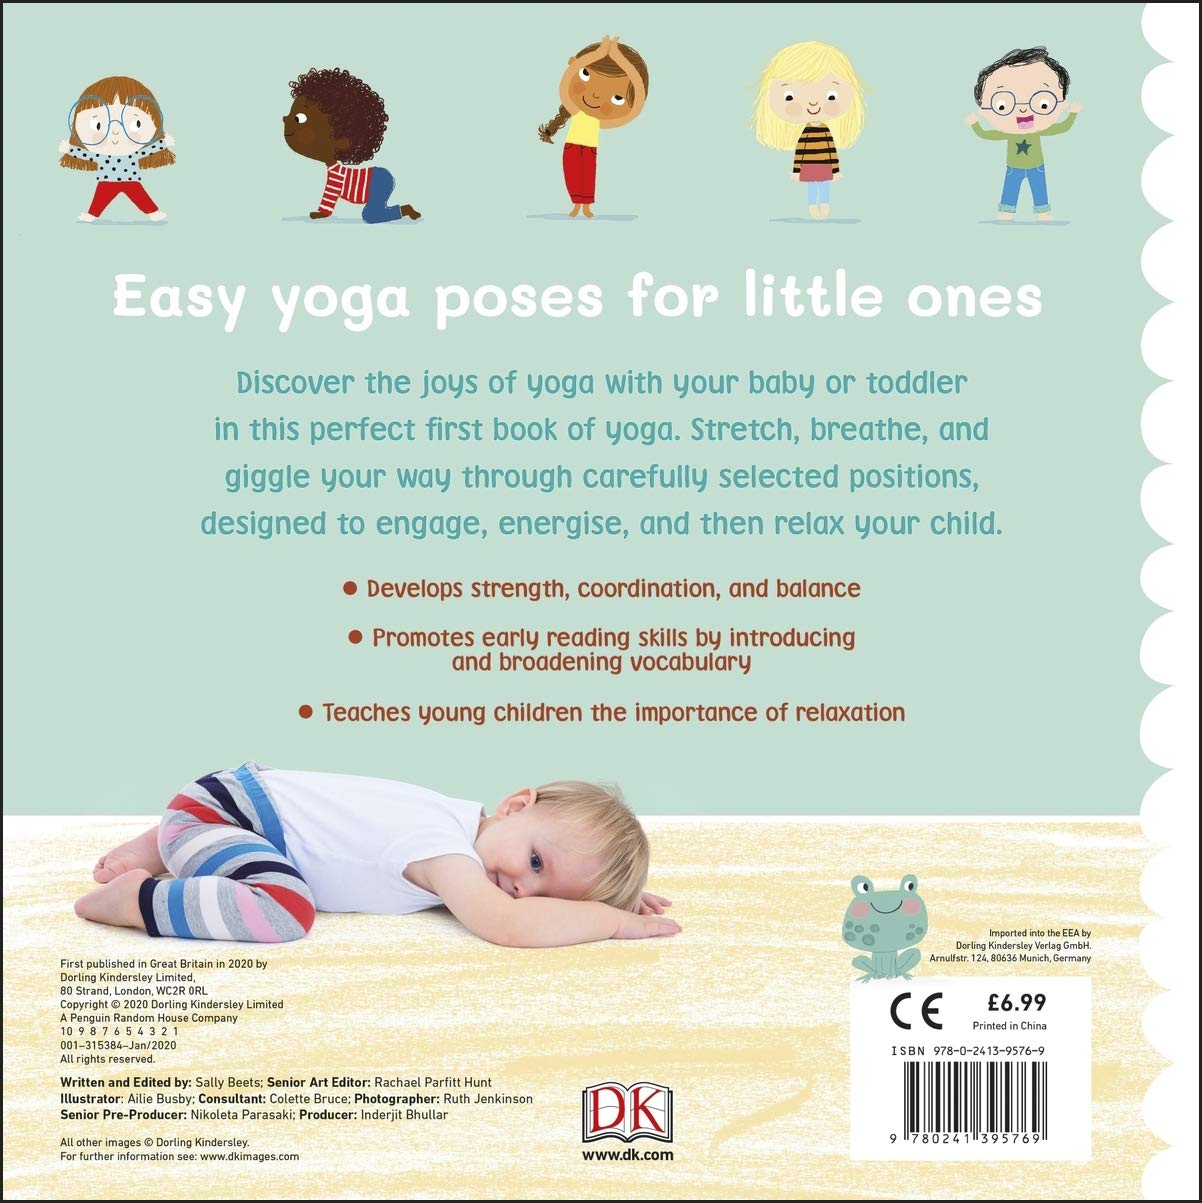 Do Yoga, Baby! Six Reasons to Do Yoga with Your Little Ones - ChildLight  Education Company